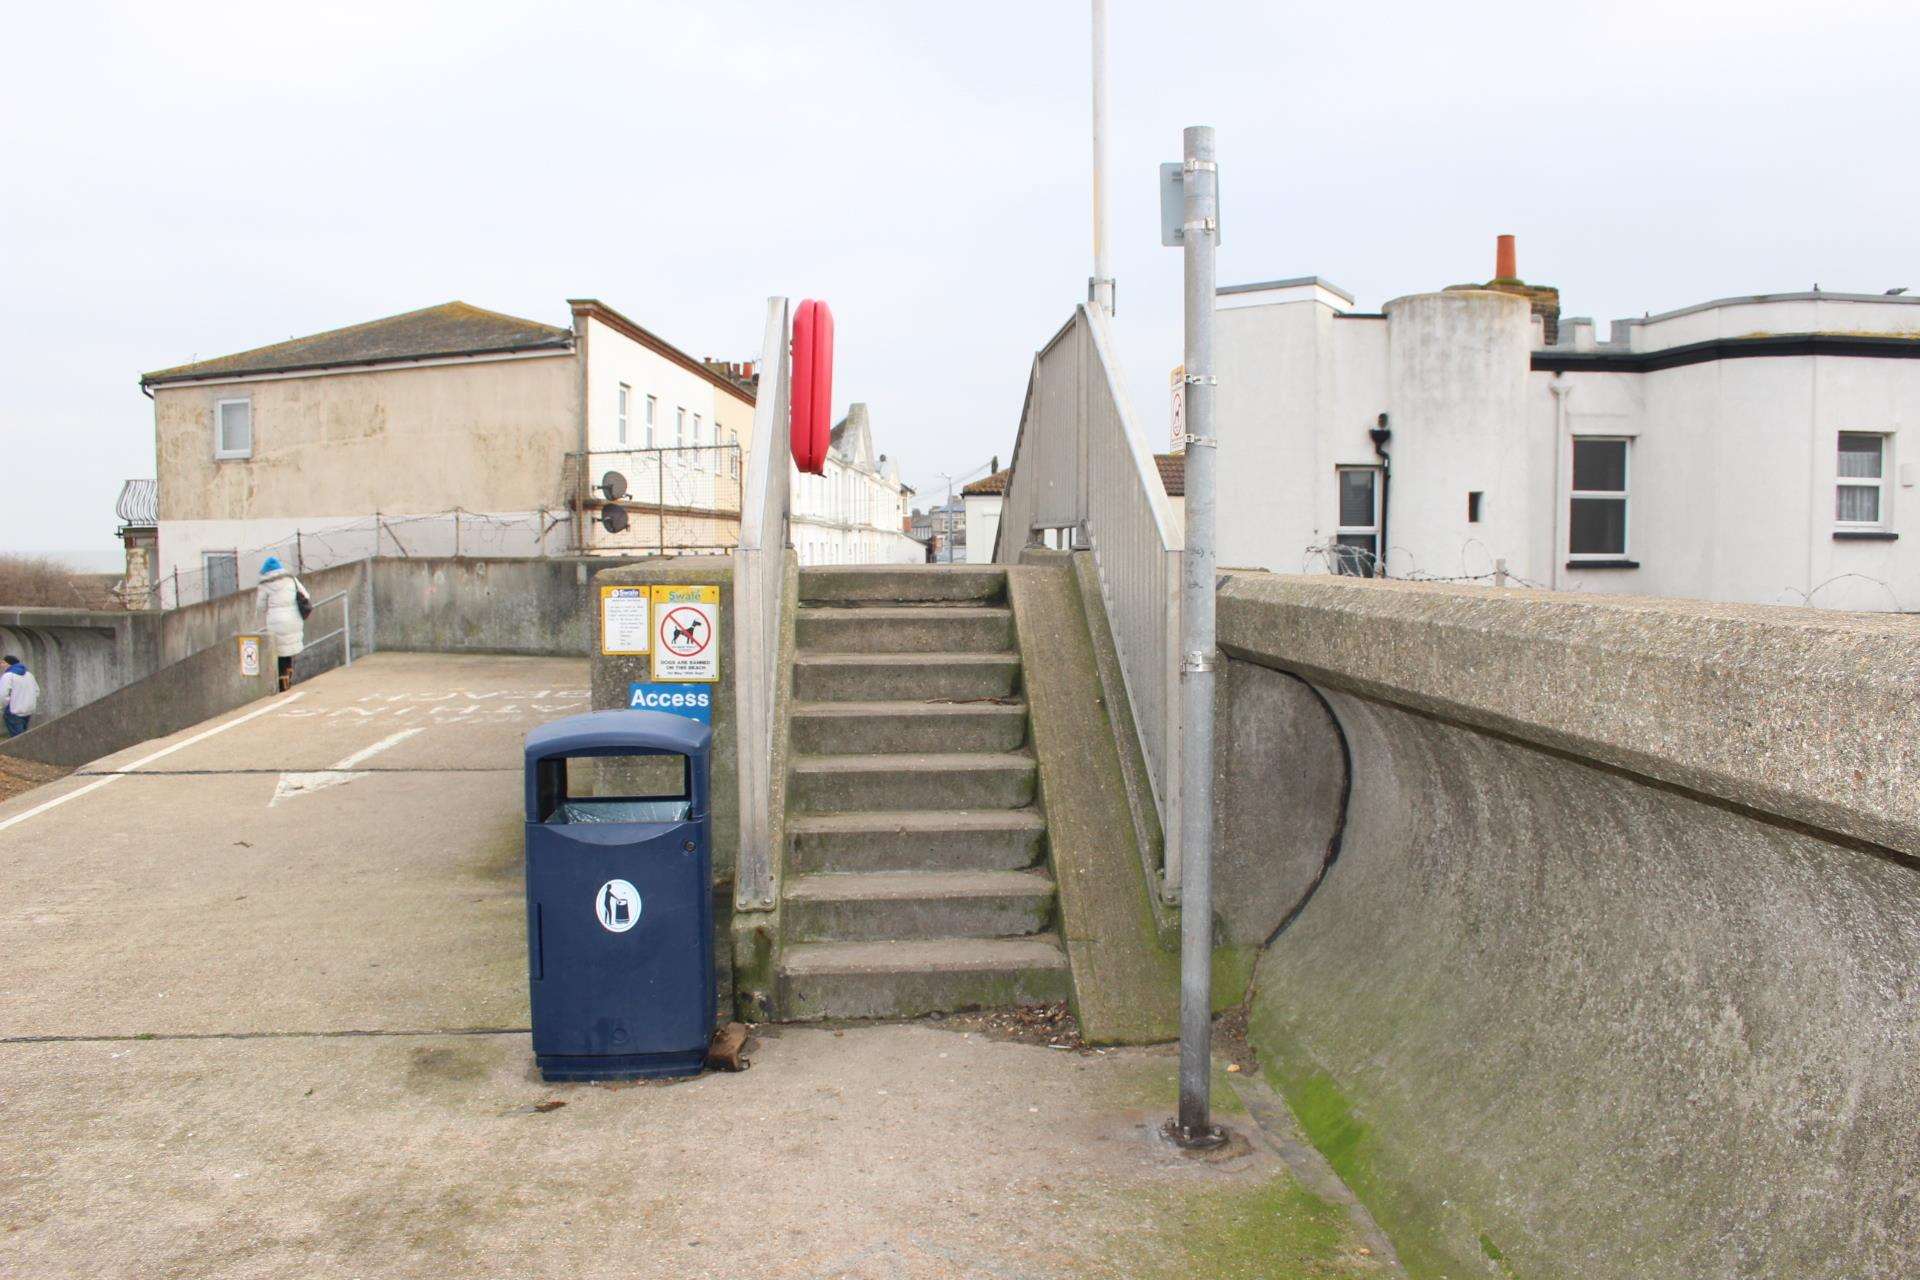 Steps make it difficult for cyclists, wheelchair users and parents with buggies to use the promenade at Neptune Jetty, Sheerness (7041841)